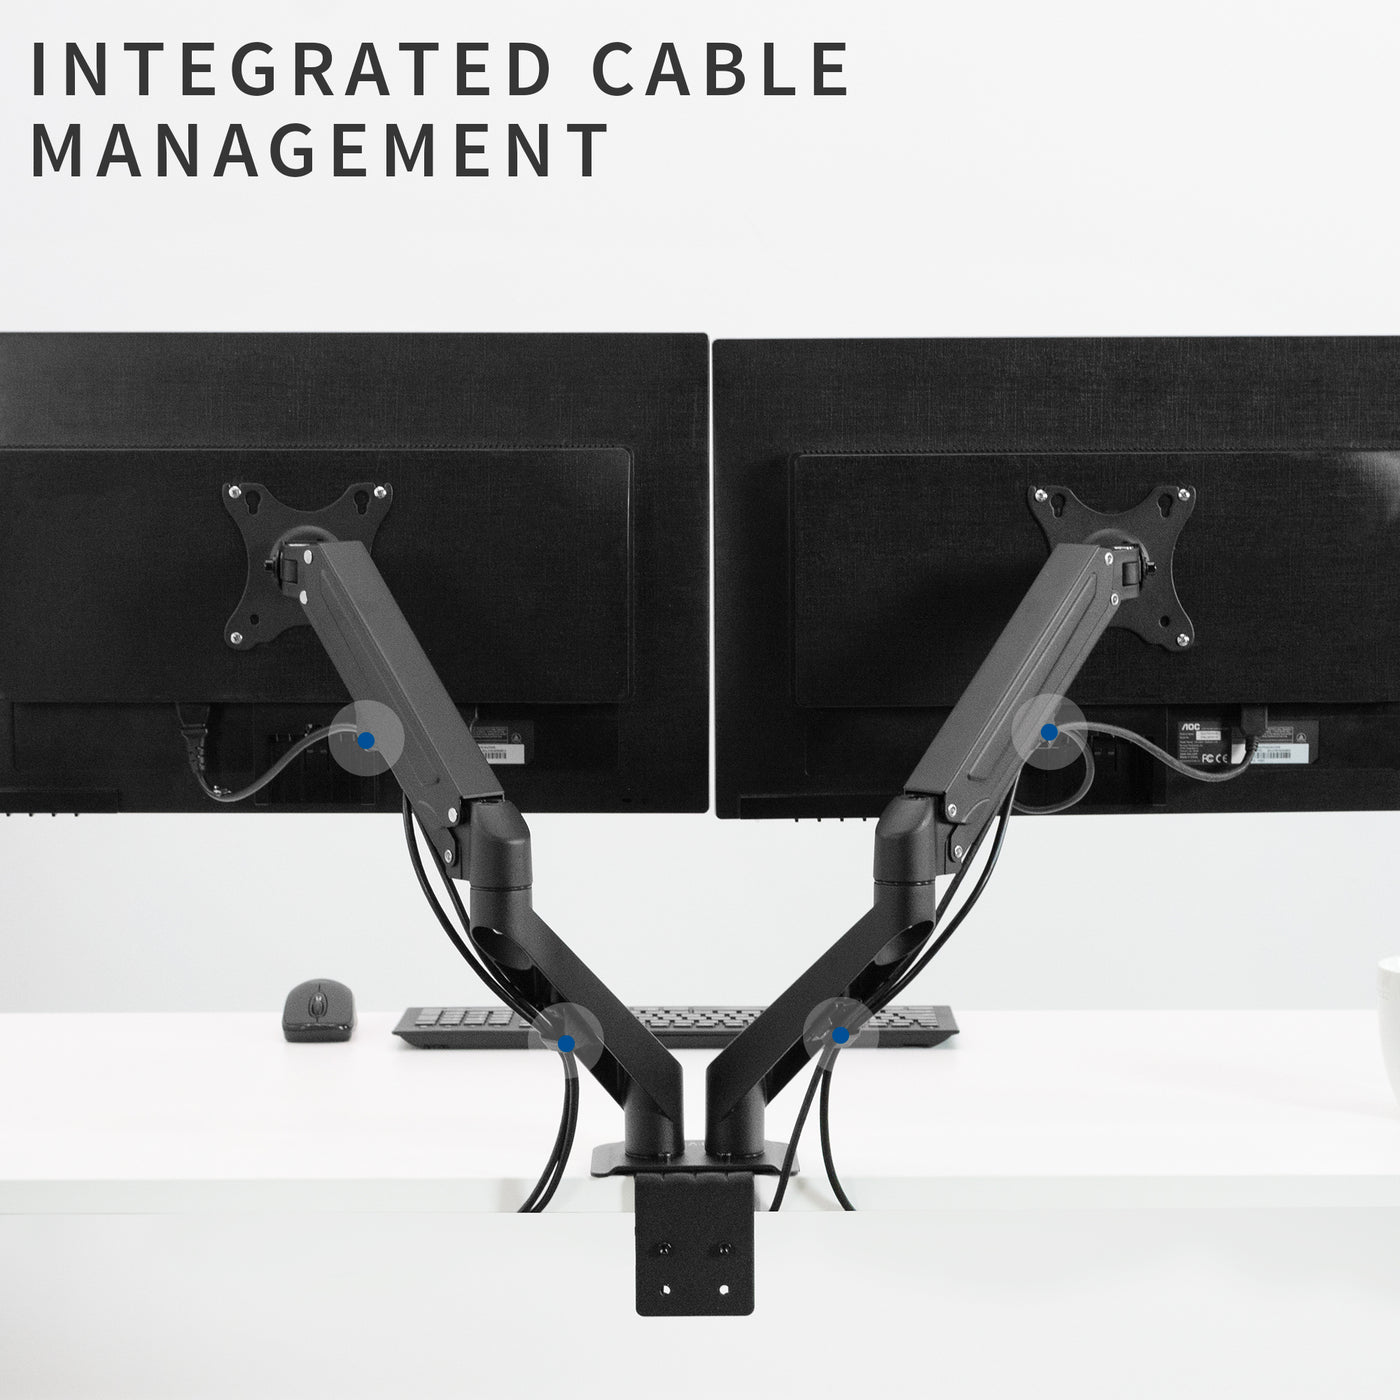 Pneumatic Arm Dual Monitor Desk Mount with Cable Management